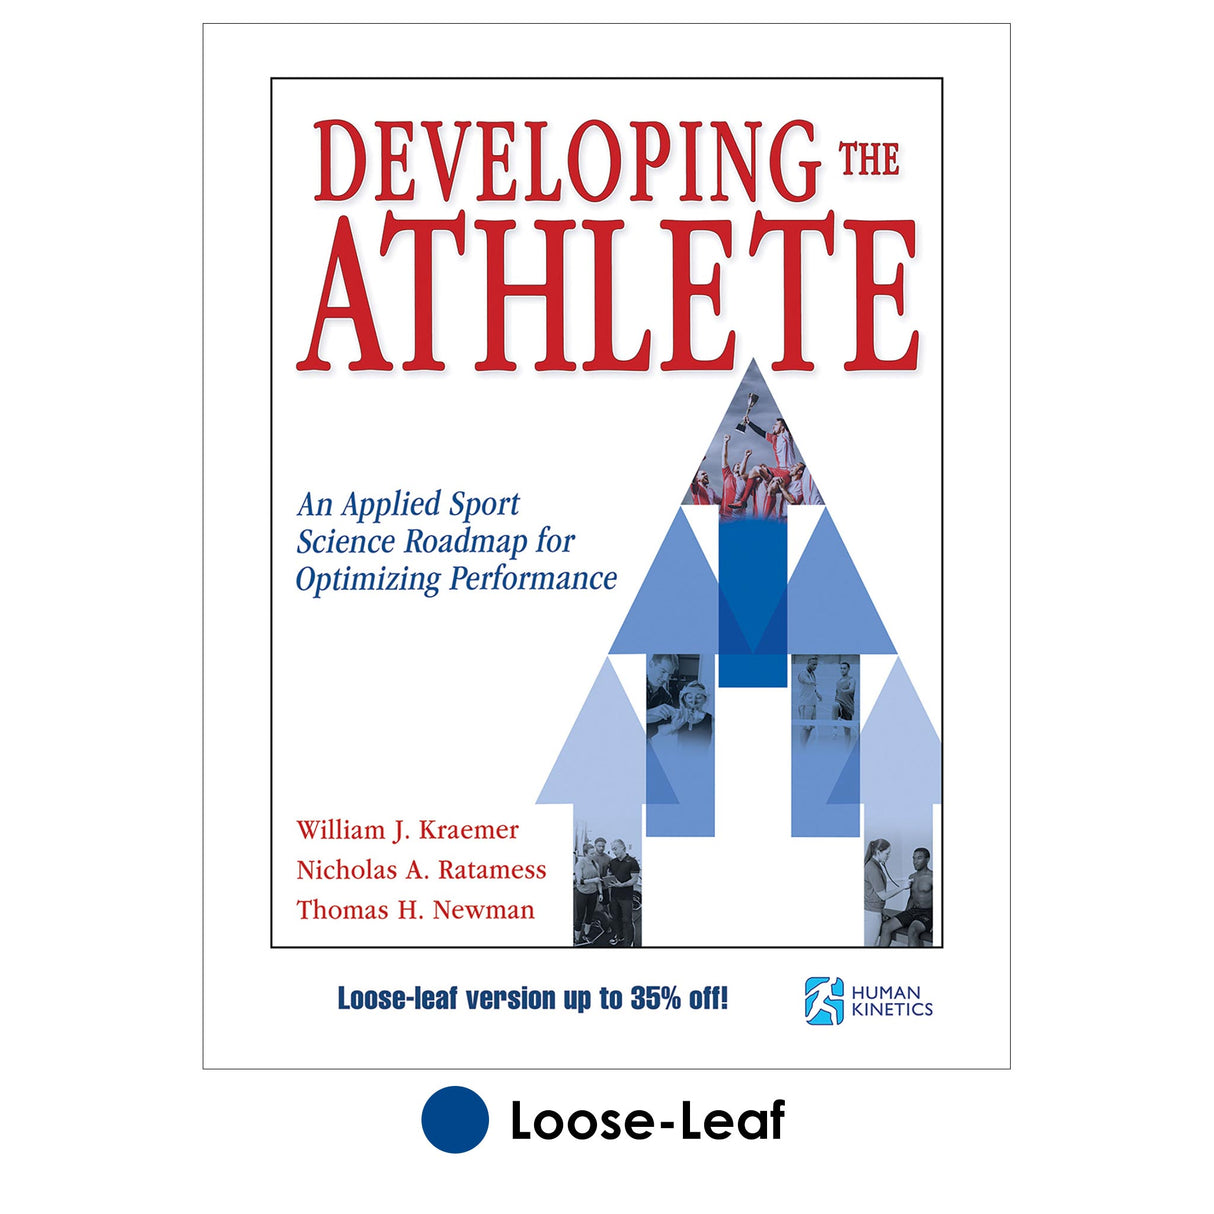 Developing the Athlete Loose-Leaf Edition